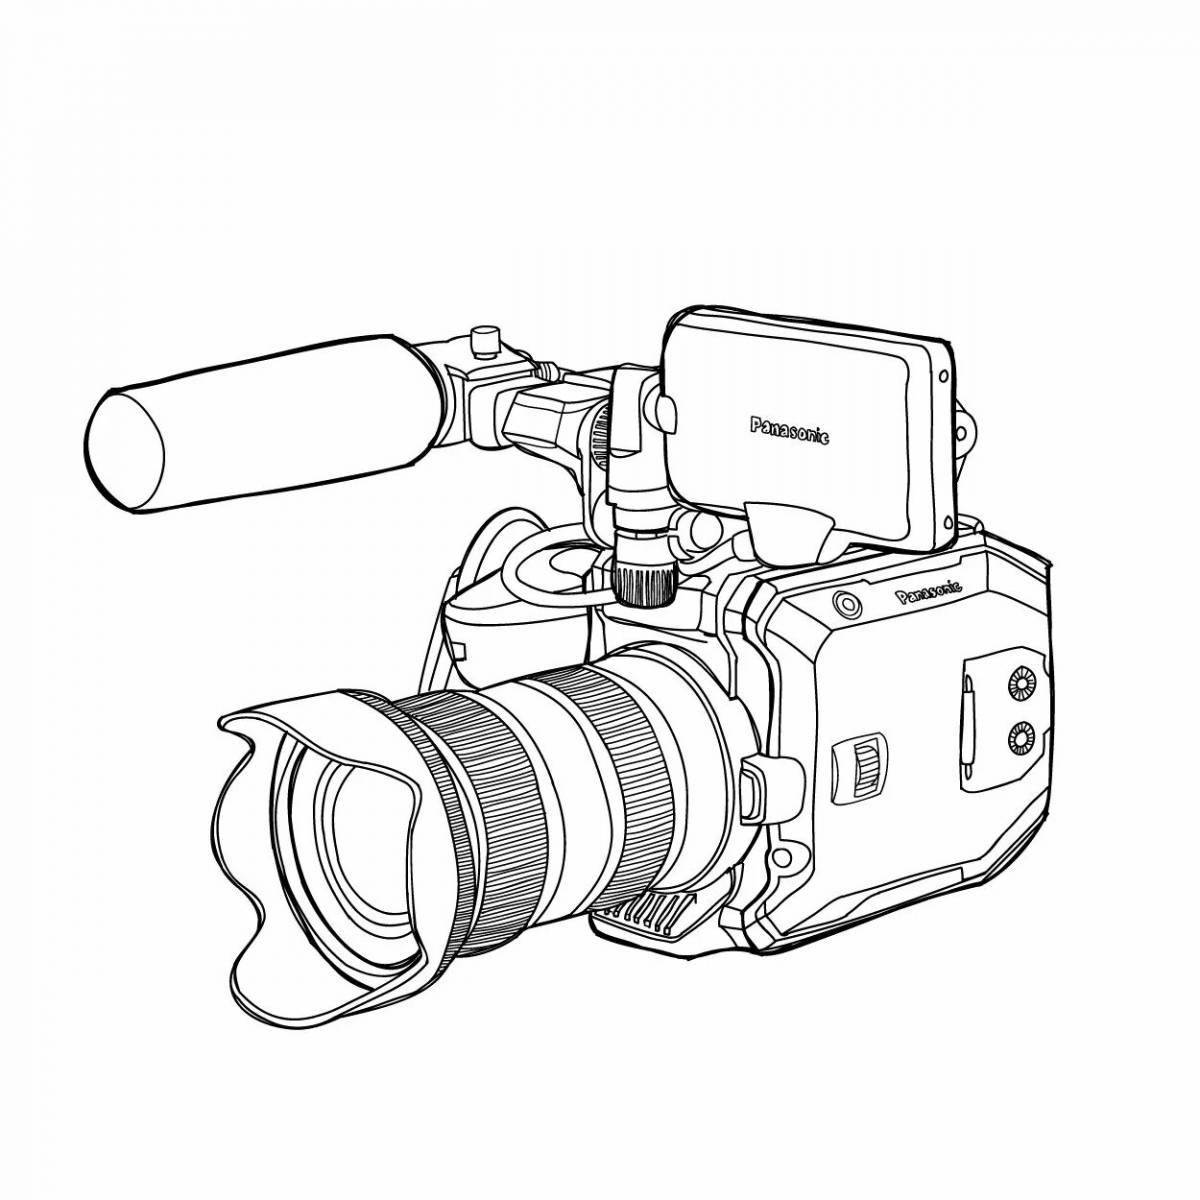 Amazing camcorder coloring page